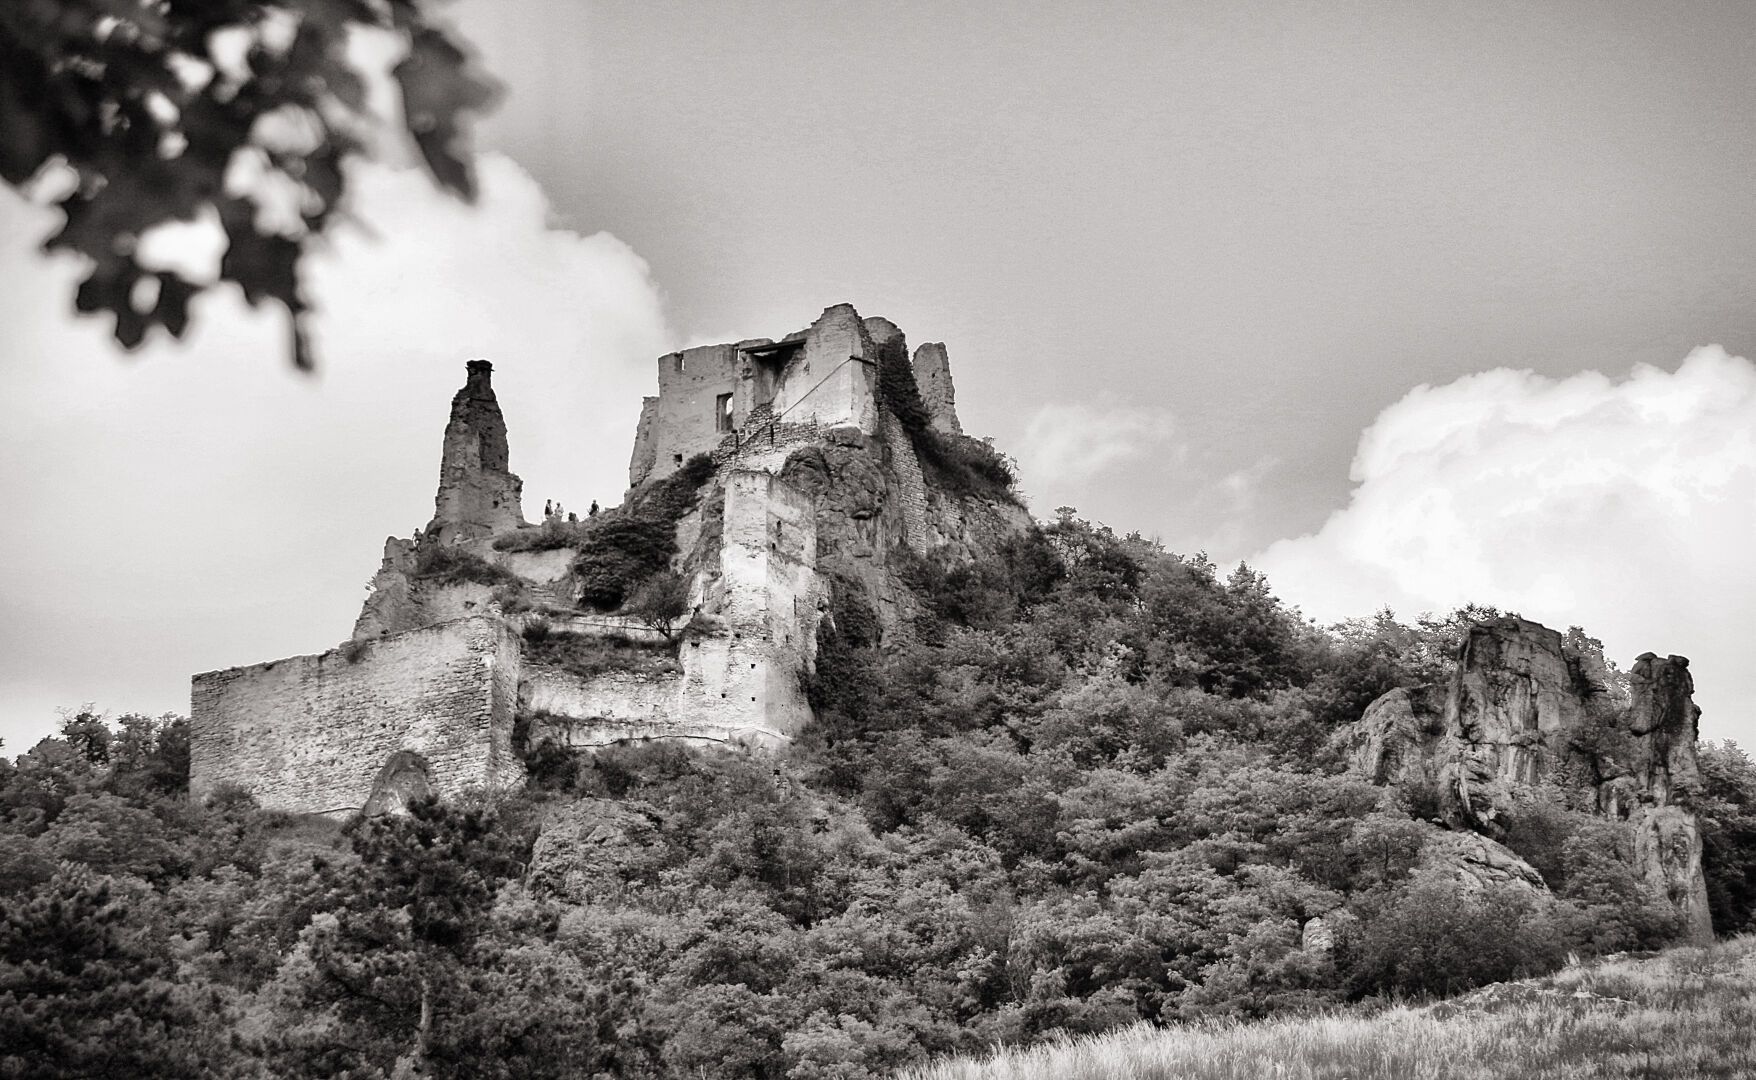 Dürnstein Castle ruins in the Wachau, Austria. 

The castle is famous because the English King Richard the Lionheart, who was returning from the Third Crusade, was held here in knightly custody from 1192 to 1193.

#blackandwhite #photography #monochrome #ruins #castle